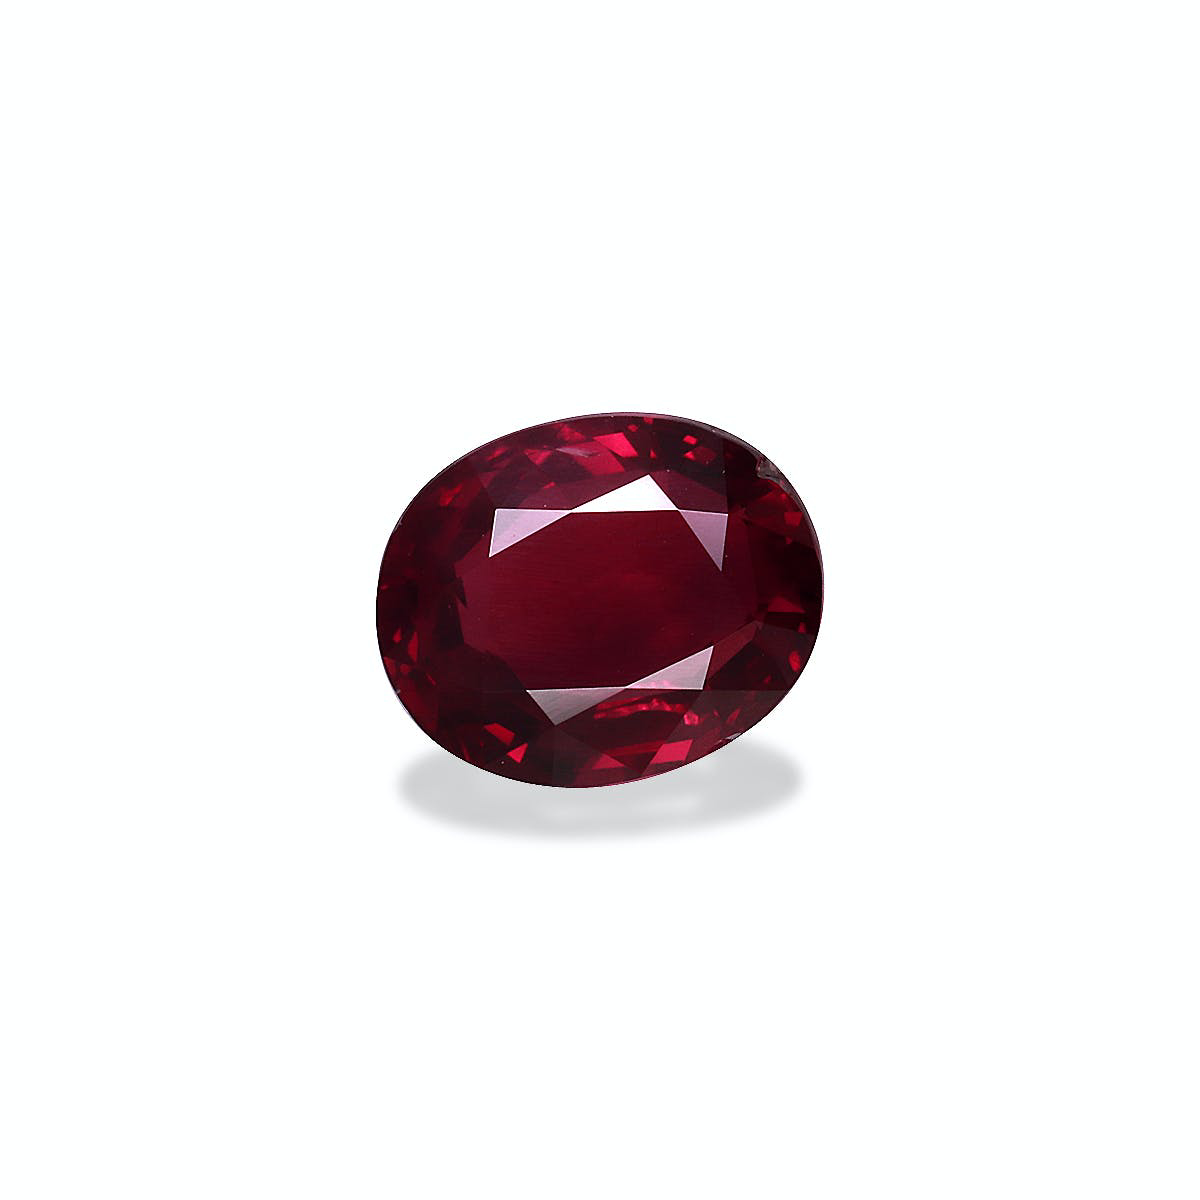 Picture of Unheated Mozambique Ruby 3.02ct - 9x7mm (J12-44)